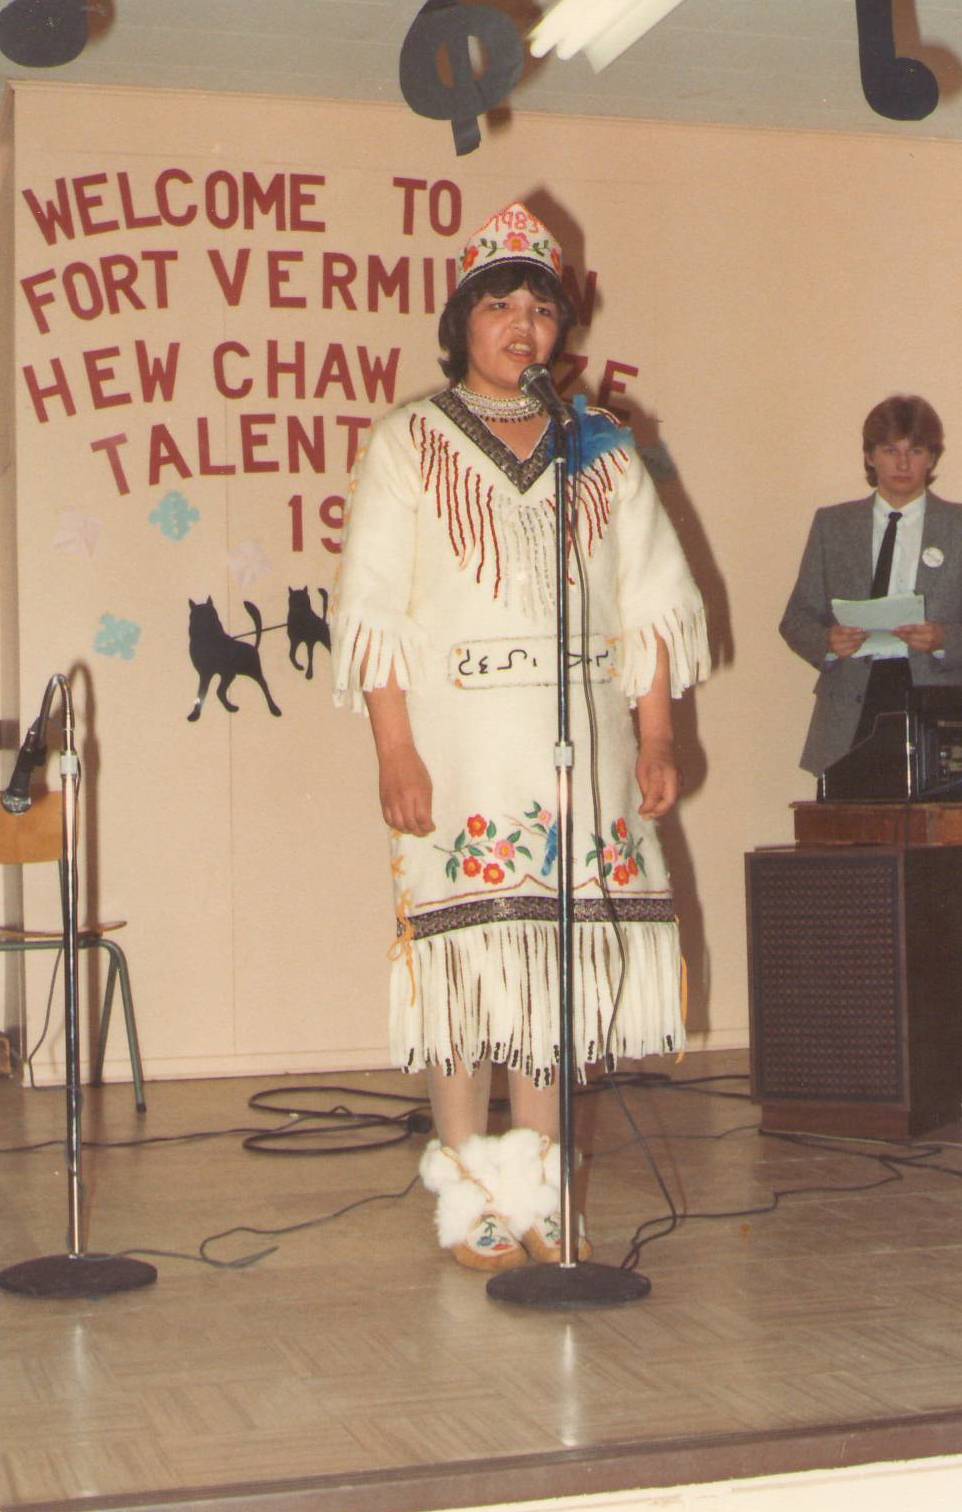 This photo comes from the 1983 Hew Chaw Daze Talent show. This lady is beautifully dressed and were sure sounds just as good - we just aren't sure who she is!
Bonus Question- We also don't know who the gentleman in the background is. He seems to be the presenter in other photos - but thats the best we have!

*EDIT*
This performer has been identified as Lorraine Auger and the gentleman in the back as Mark West.
998.1.60.169 / Newman, Jack and Pearl